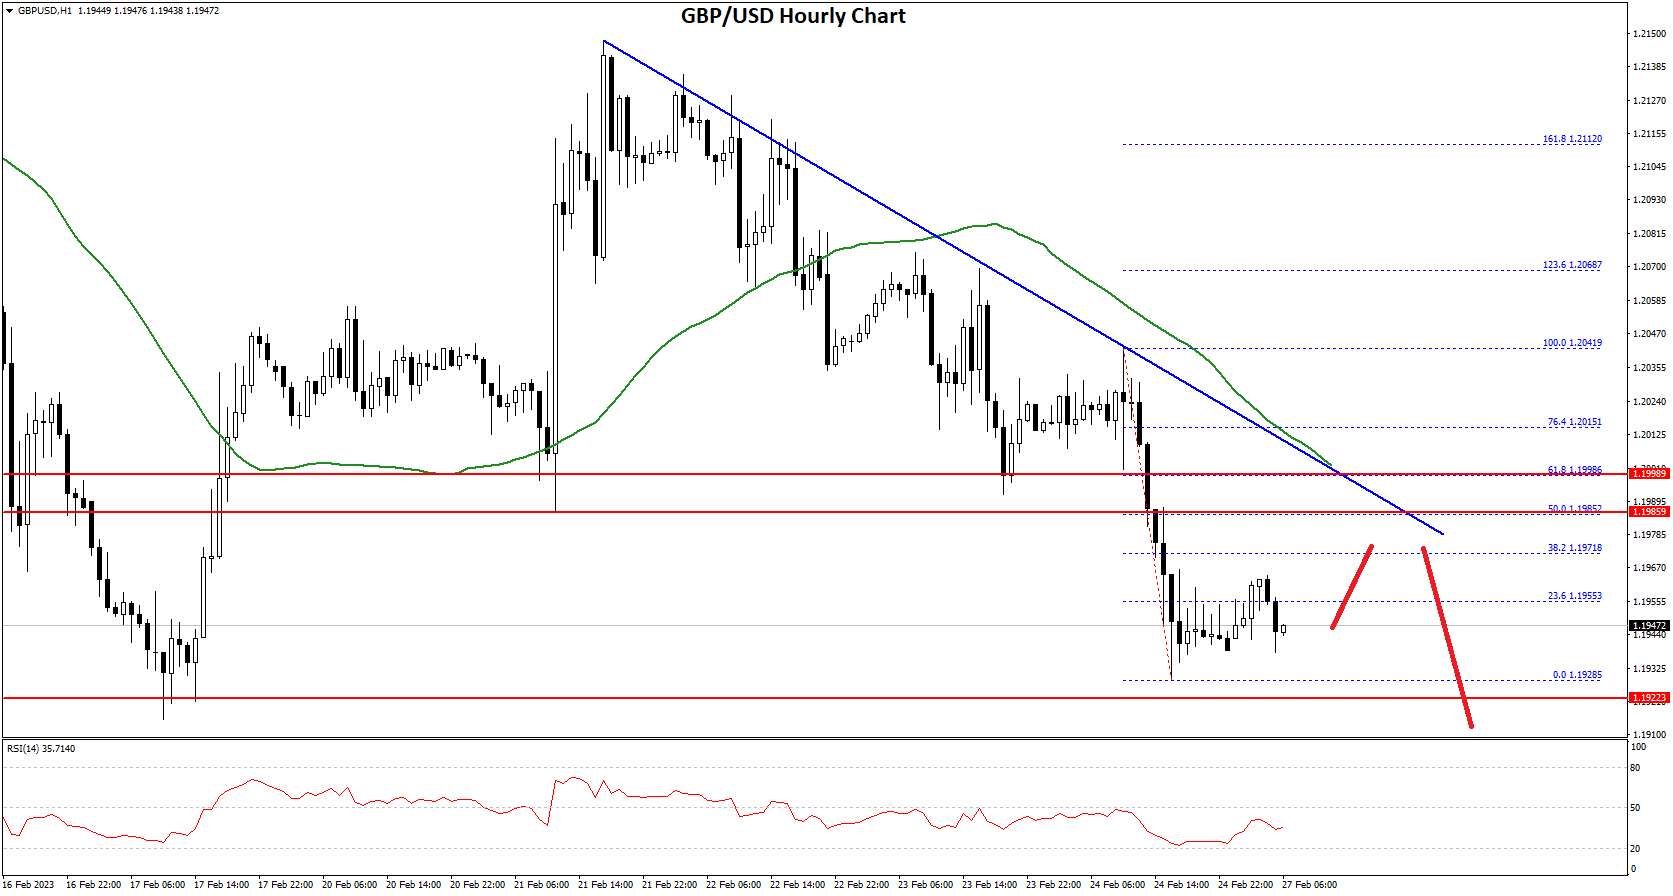 GBP/USD Declines Heavily While EUR/GBP Attempts Recovery